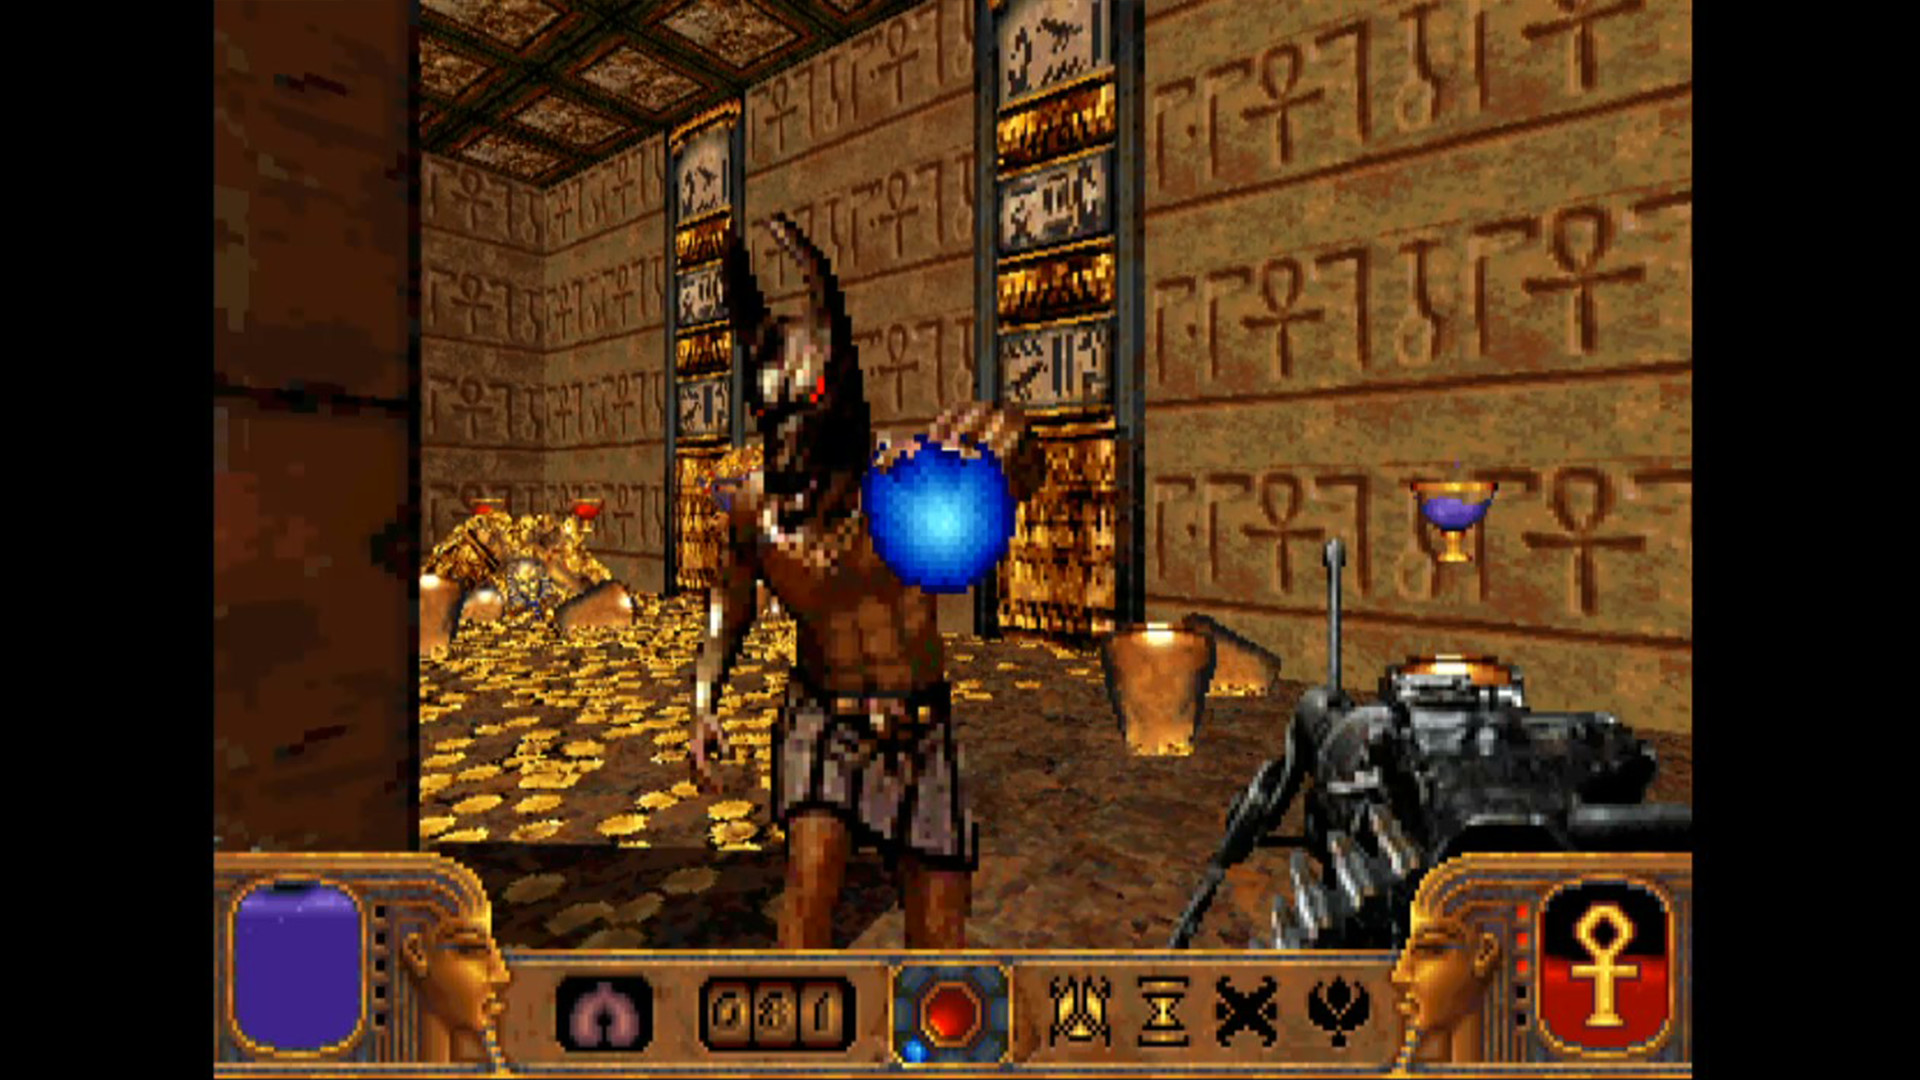 PowerSlave (DOS Classic Edition) Free Download